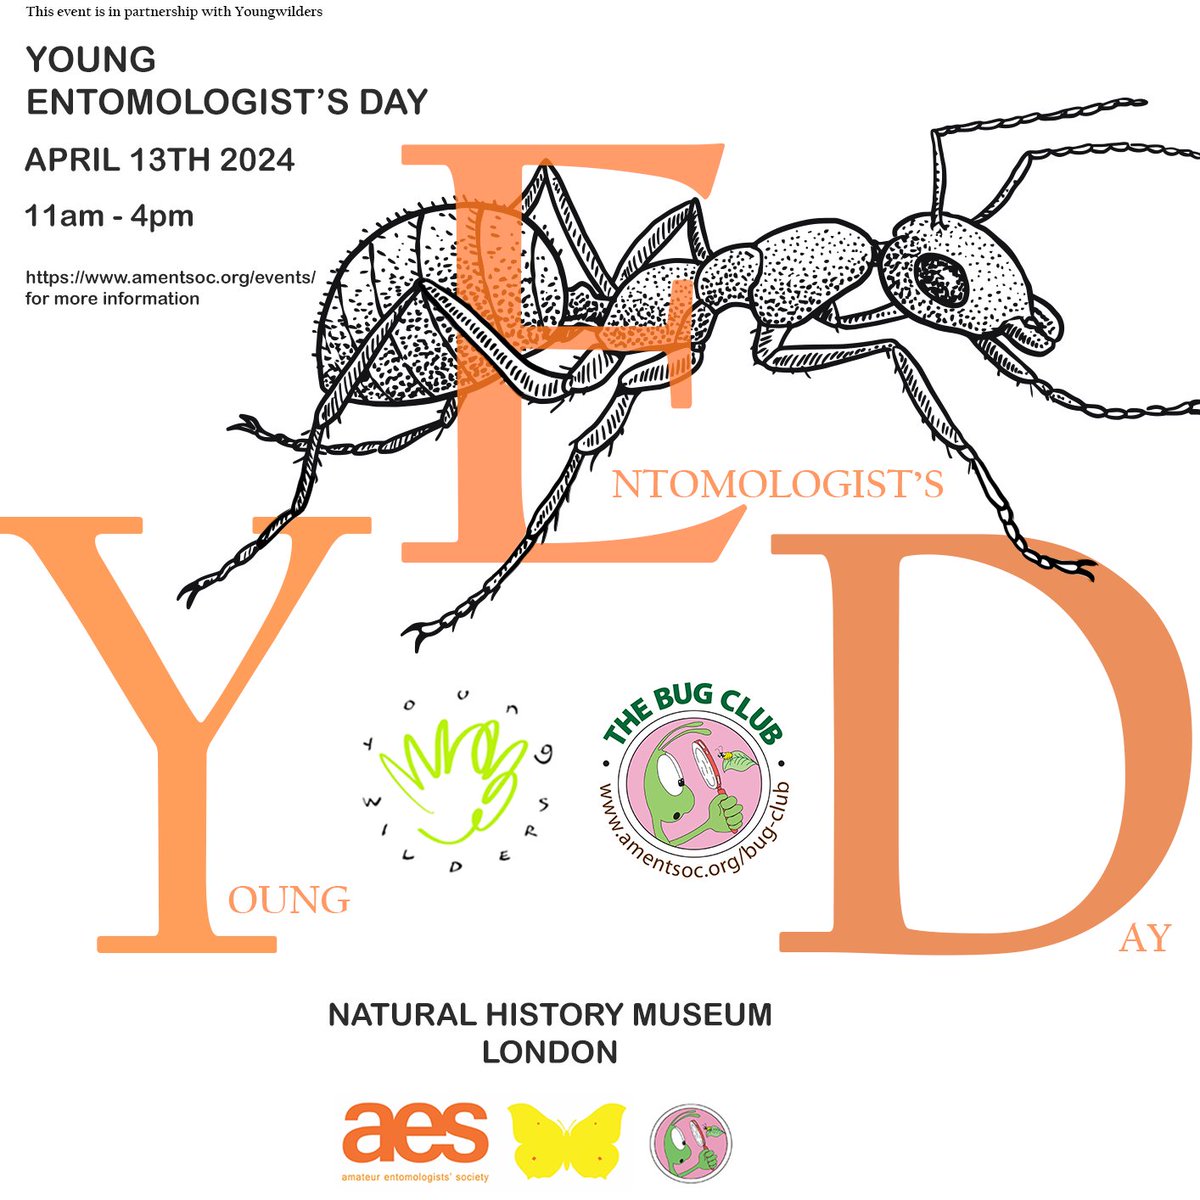 There's still space for #insect fans to present at our Young Entomologist's Day #yed2024 w/ @Youngwilders_ @NHM_London Sat 13th Apr - talk about a fav insect, recite a poem, present drawings - anything goes! For more info & sign up (it's free!) visit: amentsoc.org/events/listing…